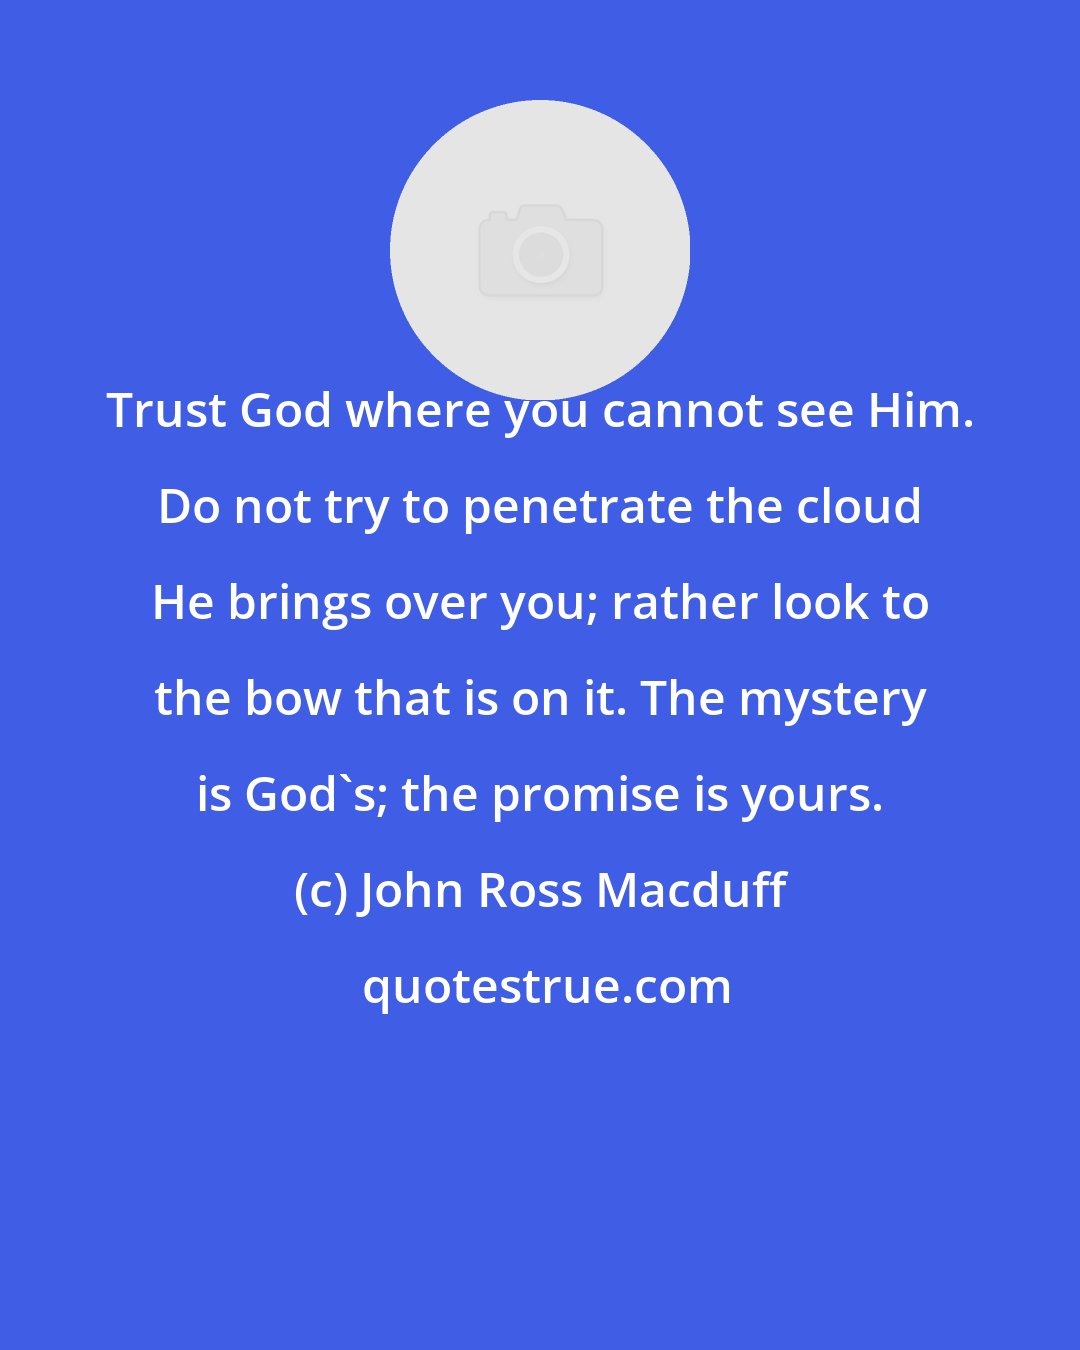 John Ross Macduff: Trust God where you cannot see Him. Do not try to penetrate the cloud He brings over you; rather look to the bow that is on it. The mystery is God's; the promise is yours.